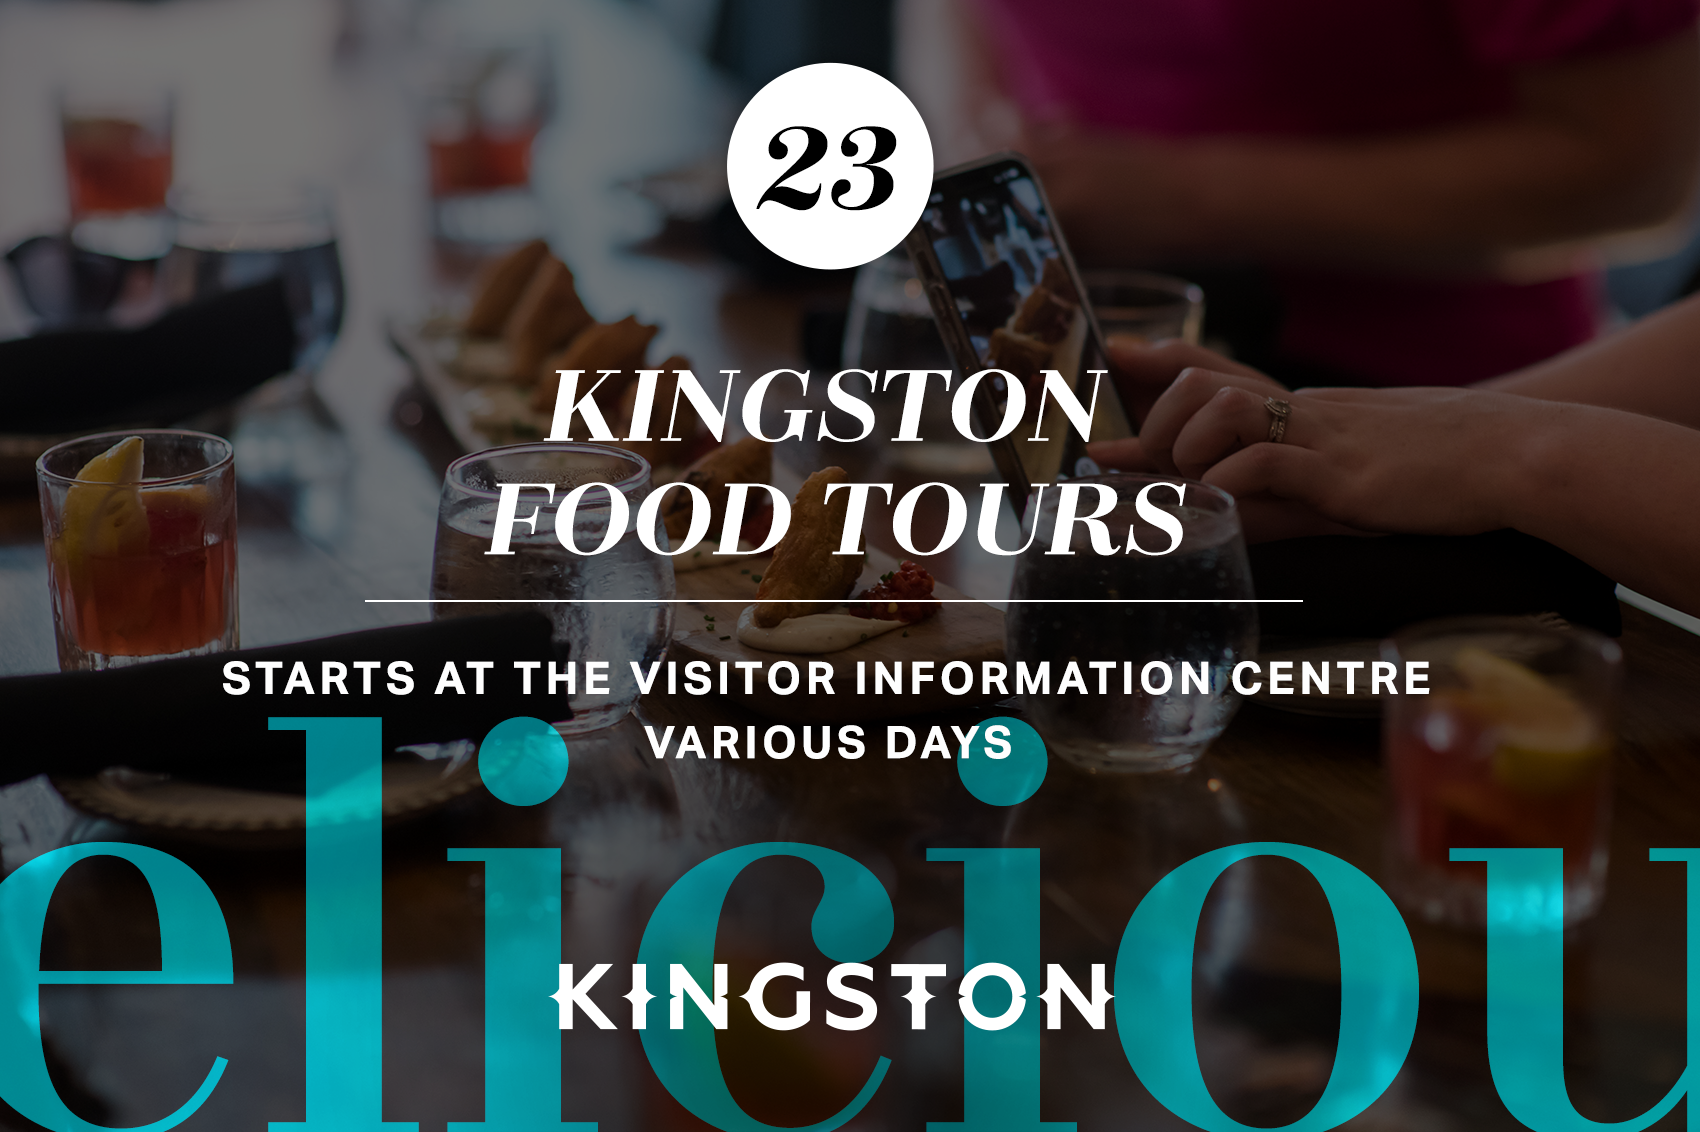 23. Kingston Food Tours: Starts at the Visitor Information Centre Various Days